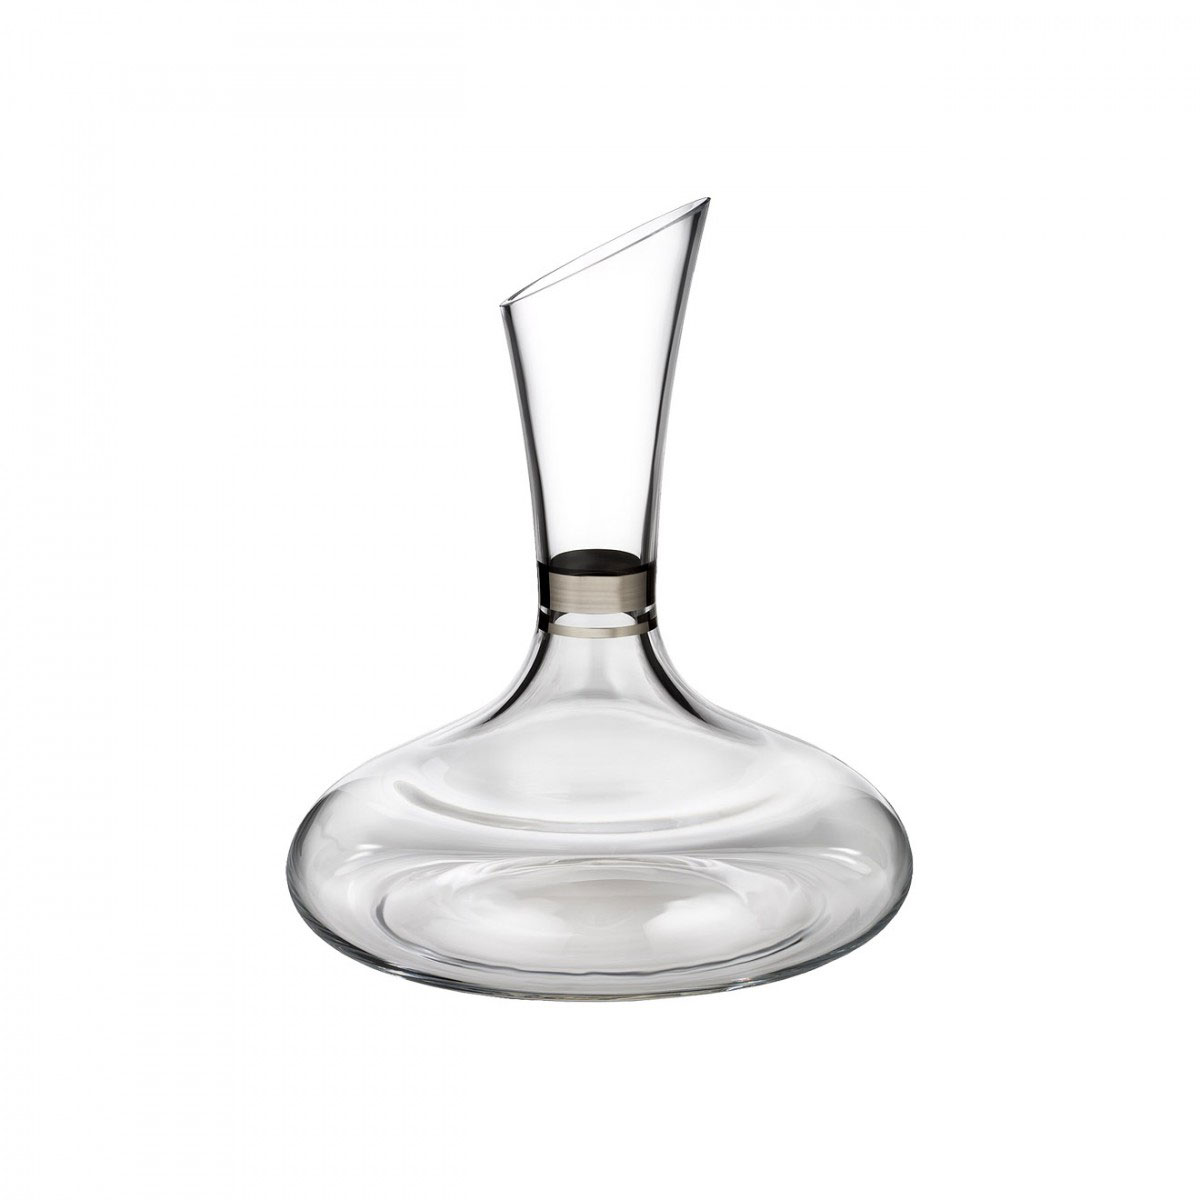 Waterford Crystal, Elegance Wine Carafe With Platinum Band